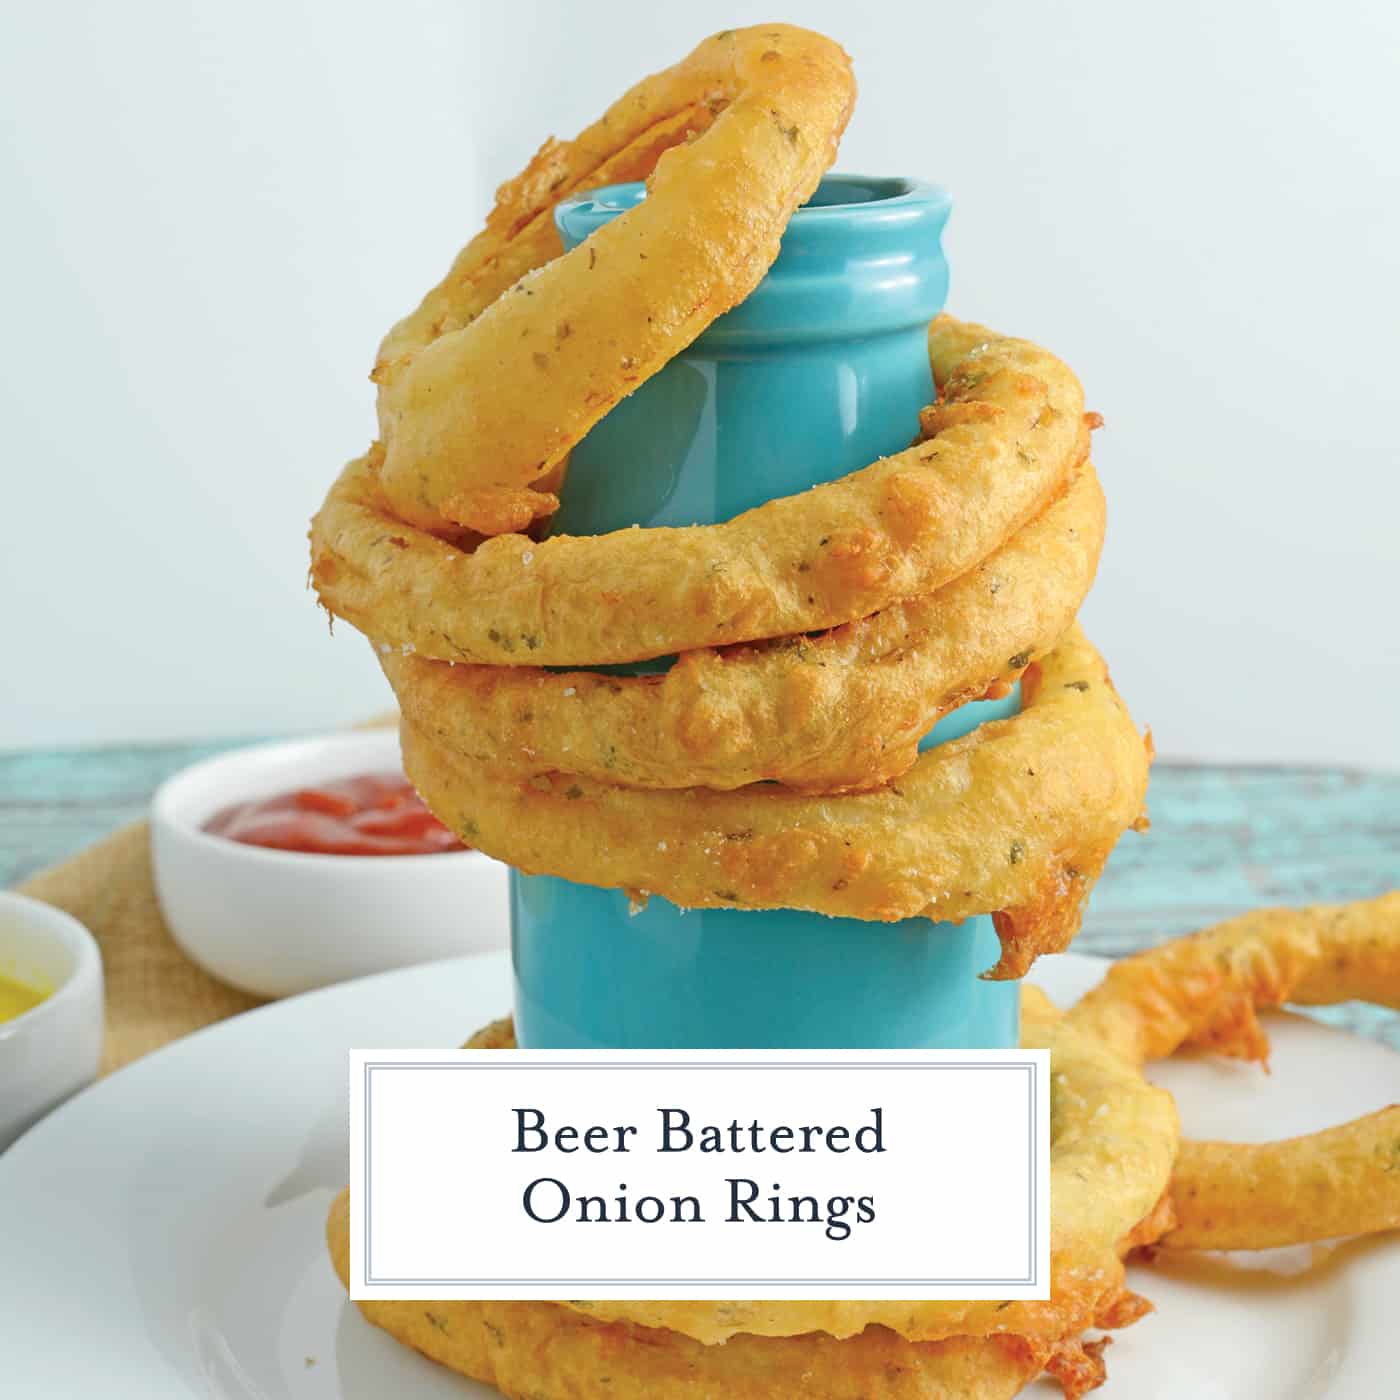 Beer Battered Onion Rings gives you crunchy and crispy homemade beer battered onion rings. Dip them in a spicy chipotle remoulade or enjoy them alone. #homemadeonionrings #friedonionrings #beerbatteredonionrings www.savoryexperiments.com